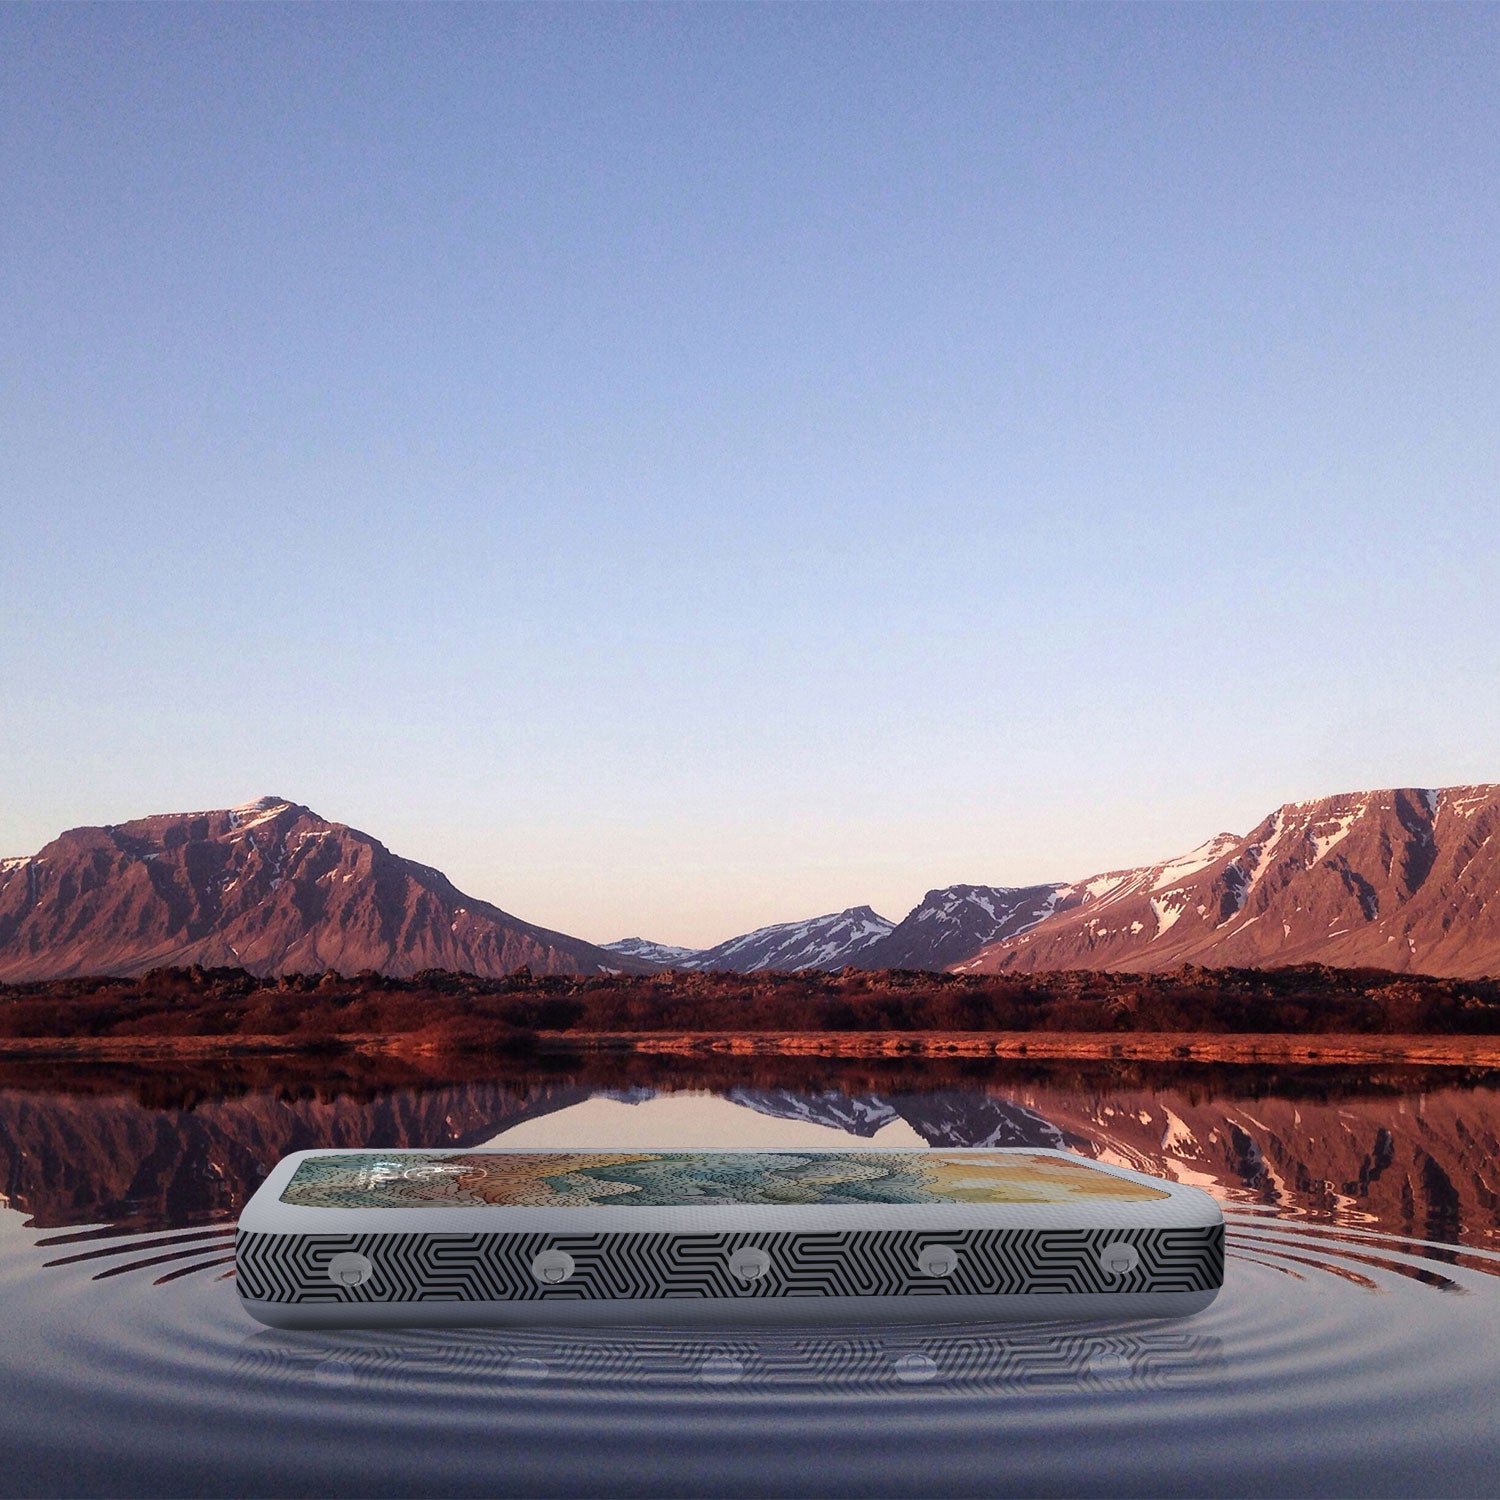 The Cambia adaptable inflatable surface floating on a lake with mountains in the background at sunset